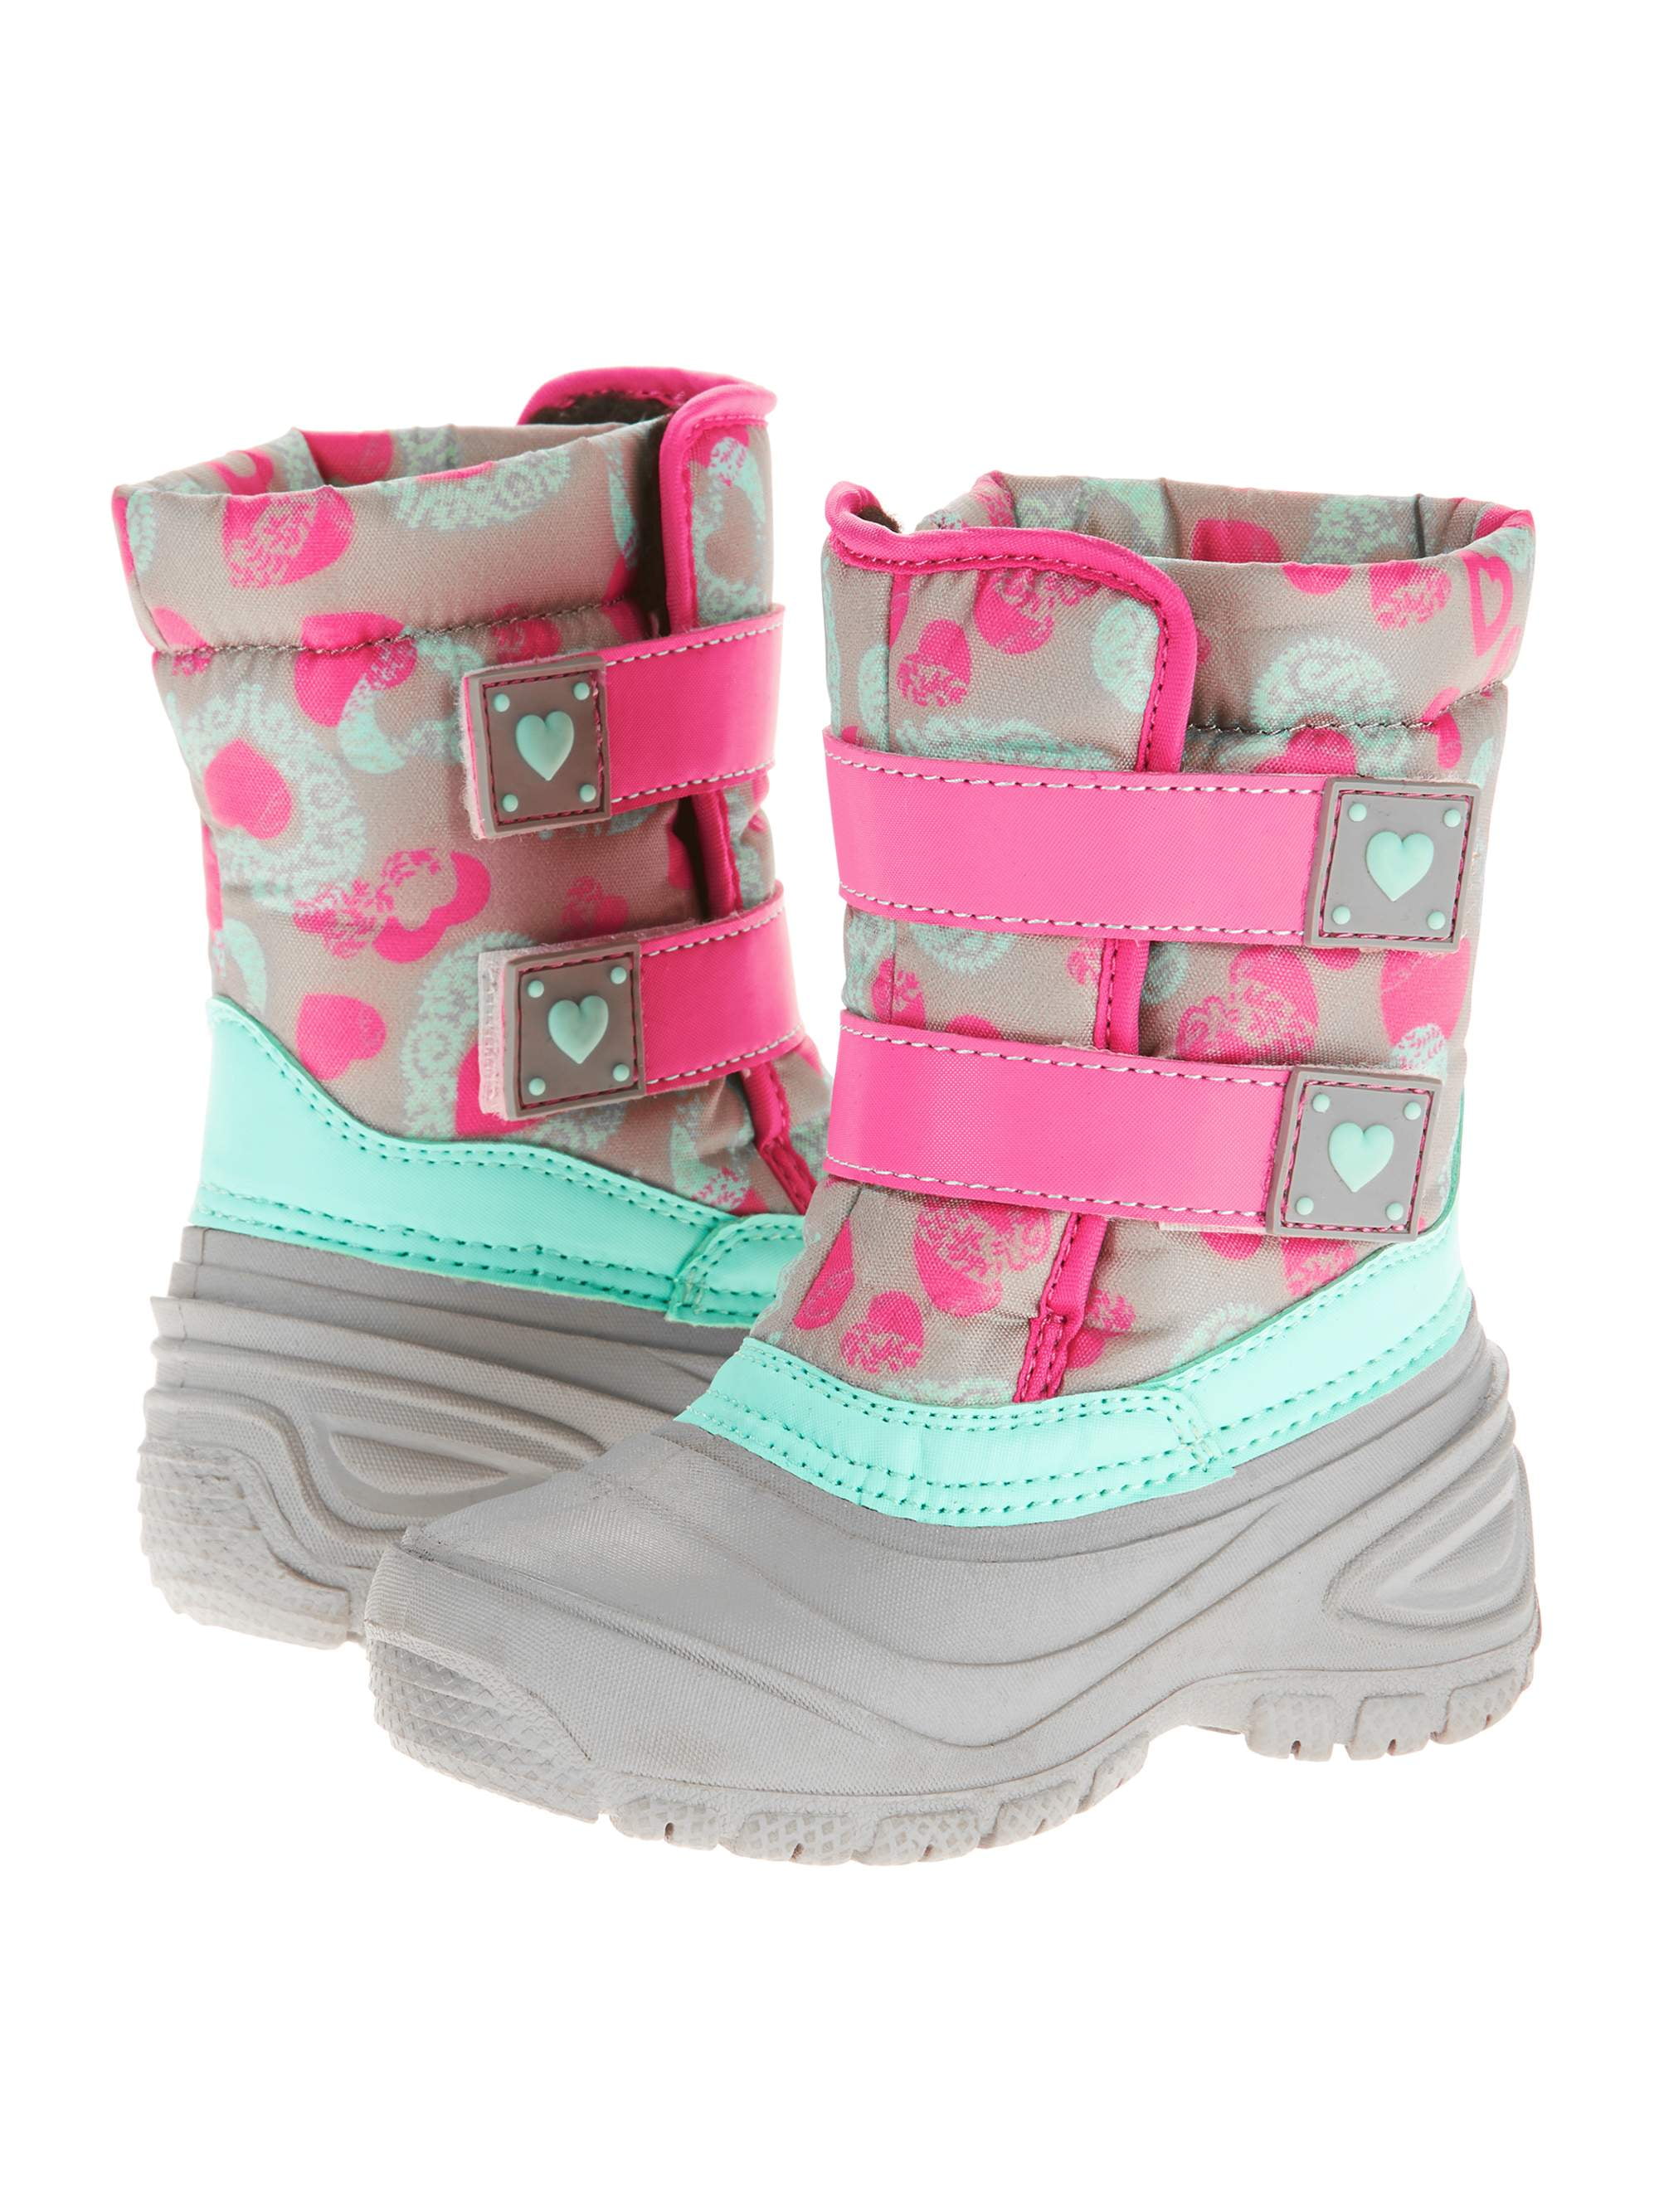 walmart snow boots for toddlers